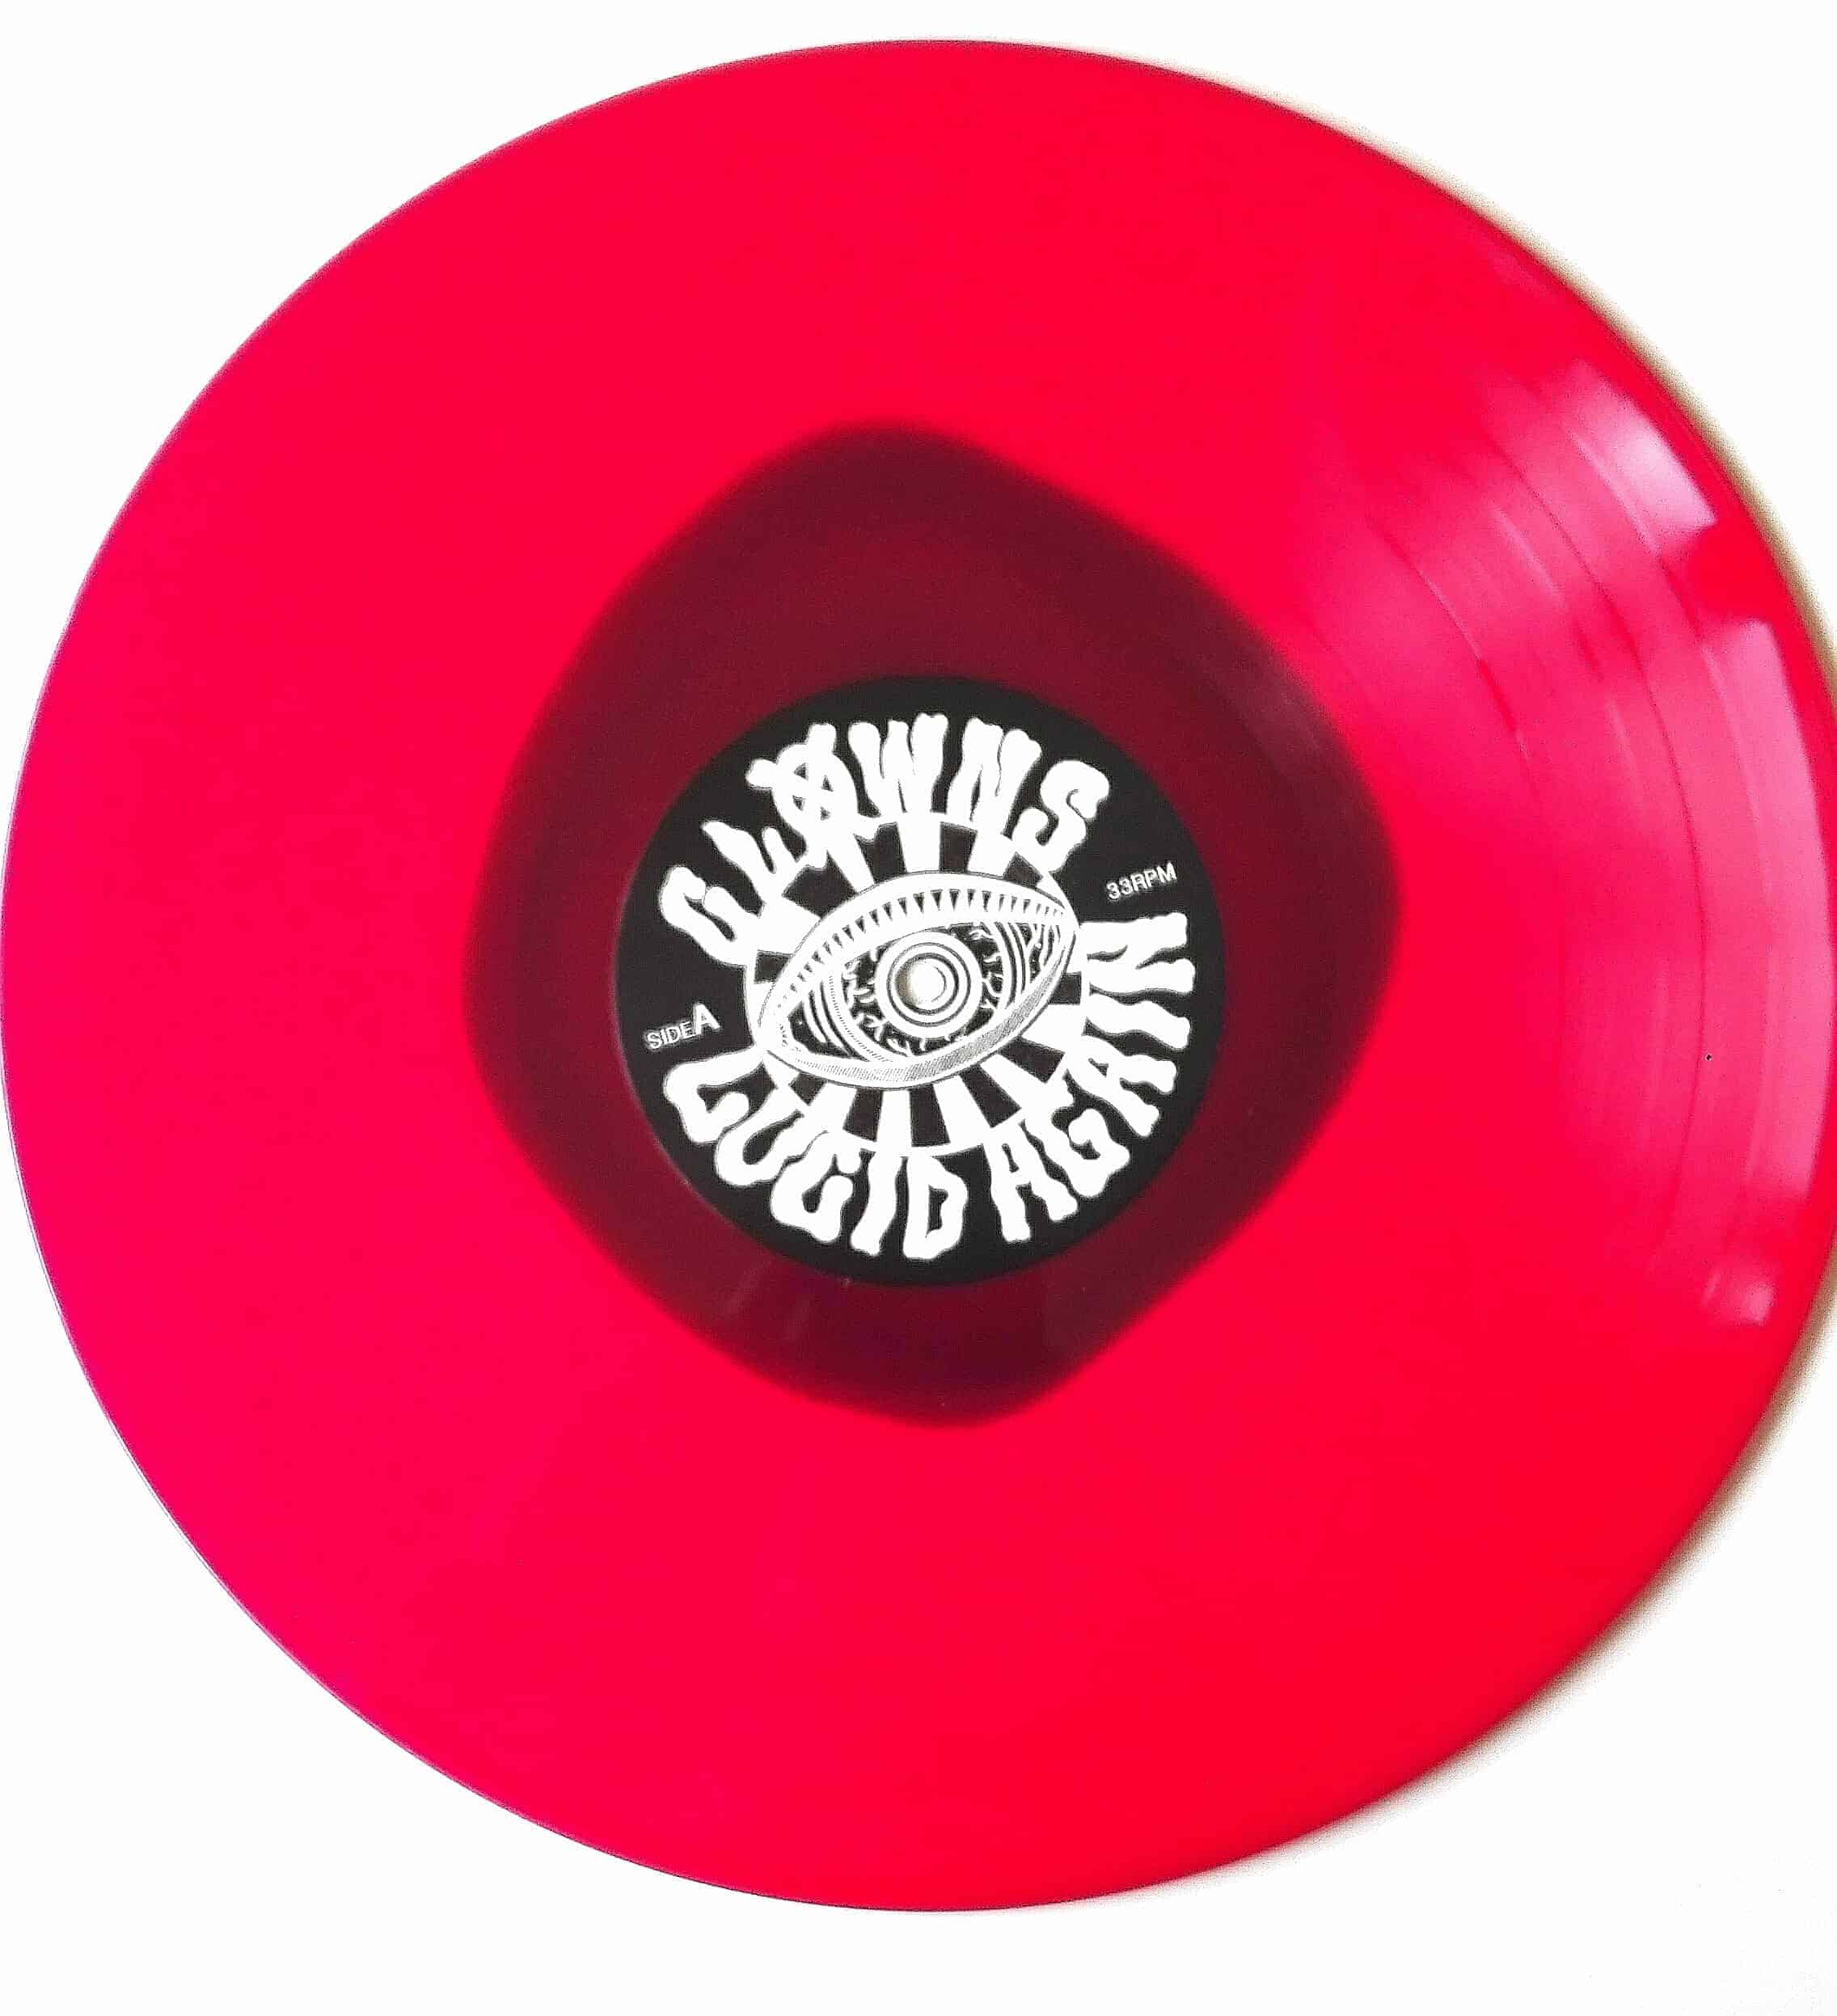 Clowns – Lucid Again LP/CD 1st press: 800 LPs, 150 crystal clear / 650 white (SOLD OUT) 2nd press: 500 copies red/clear swirl (SOLD OUT) 3rd press: 500 copies purple in red (SOLD OUT) 4th press: 500 copies crystal clear with black dot 1000 cds All CDs come in a digipack w/ booklet!